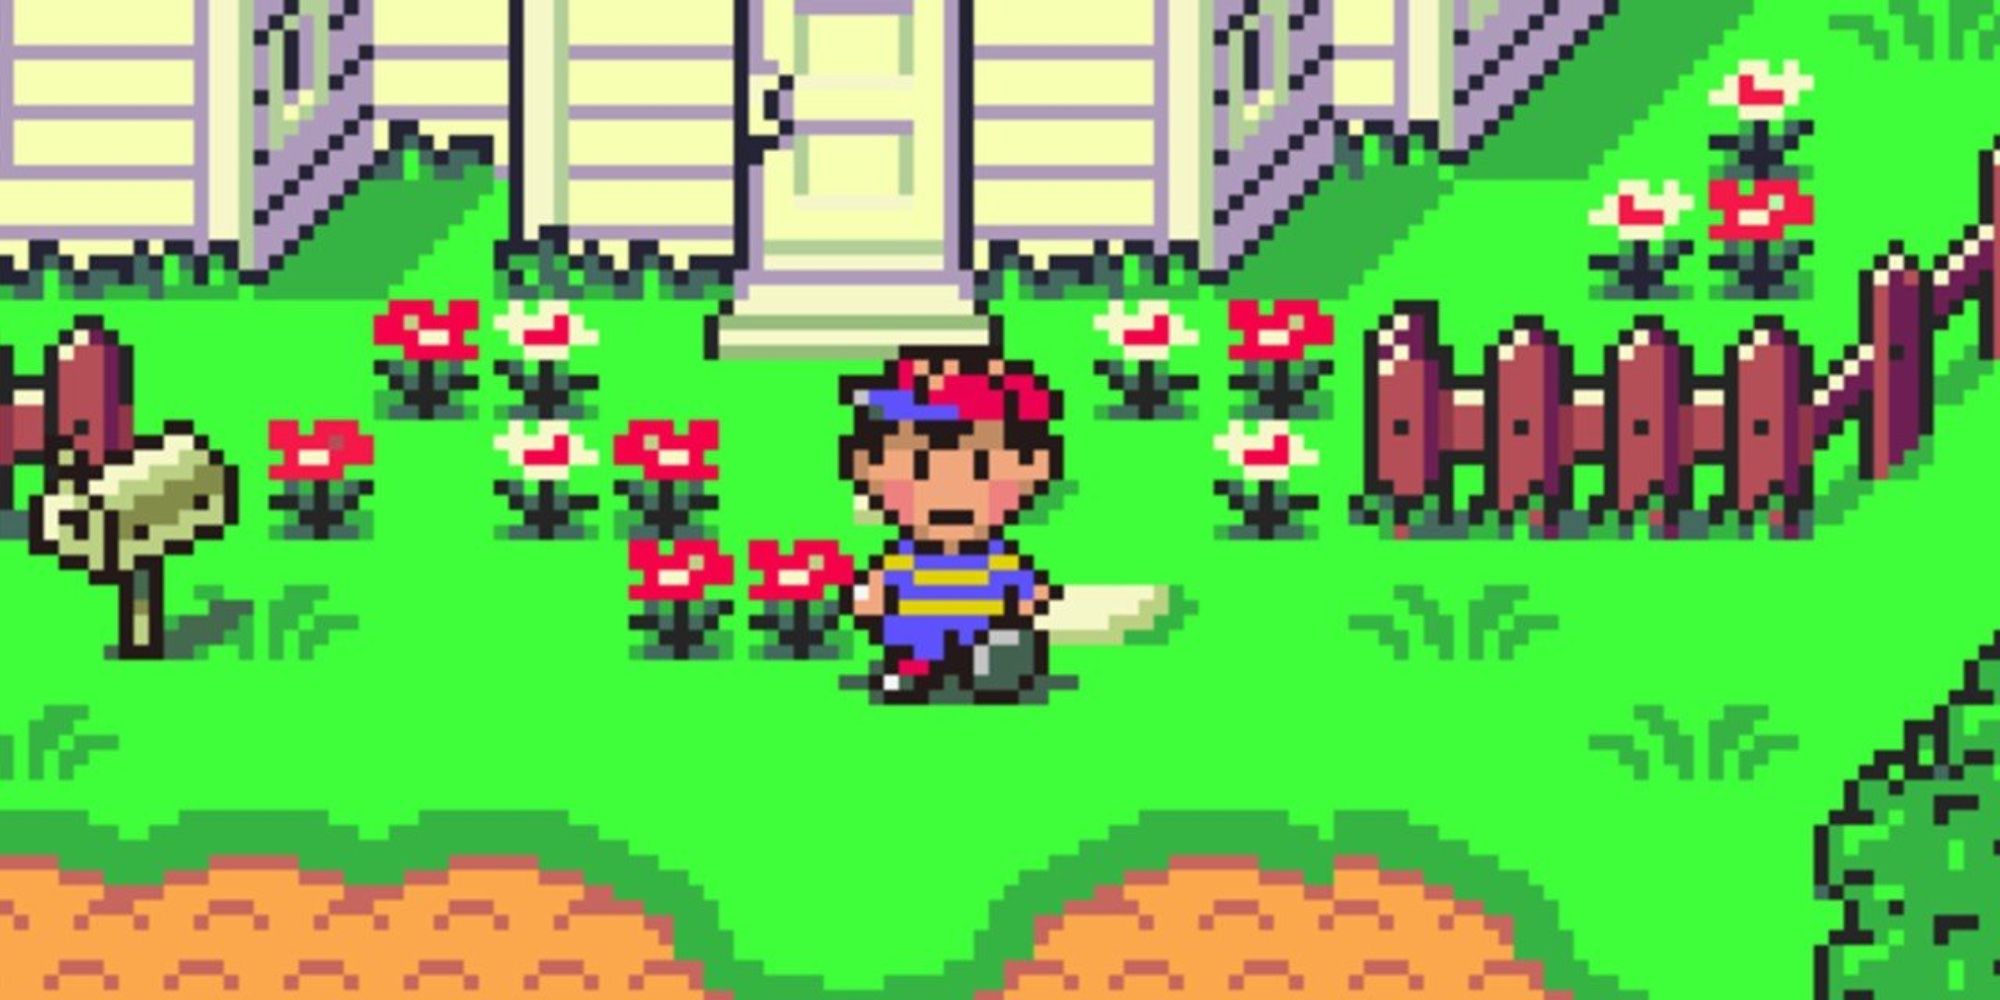 Standing as an earthbound spirit in front of a house surrounded by flowers